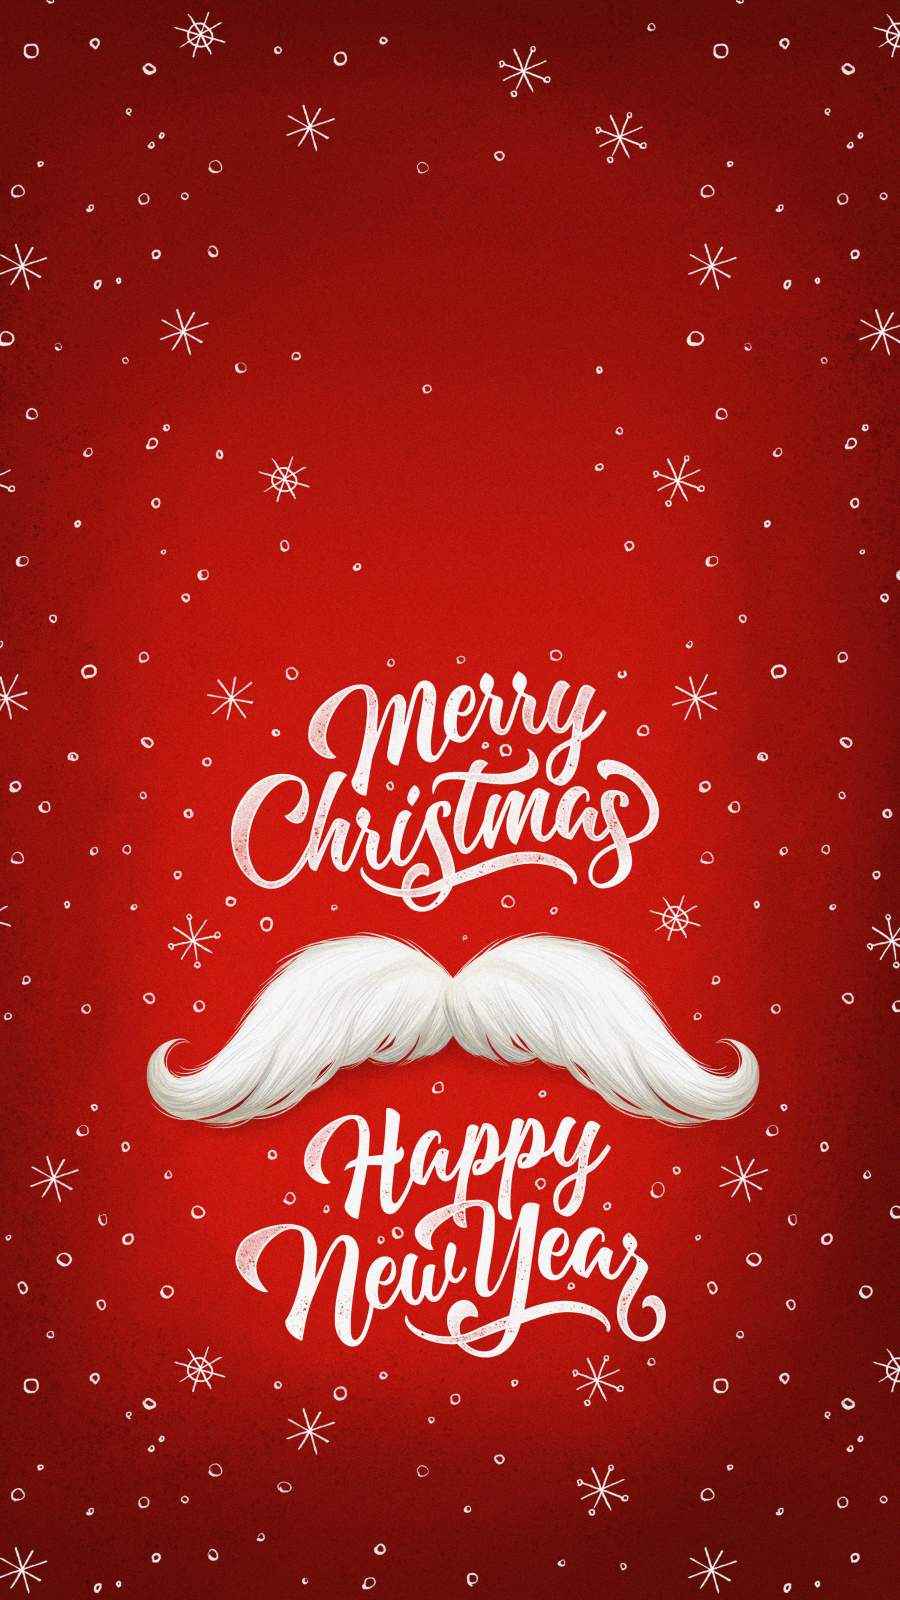 Merry Christmas Happy New Year Wallpaper, iPhone Wallpaper